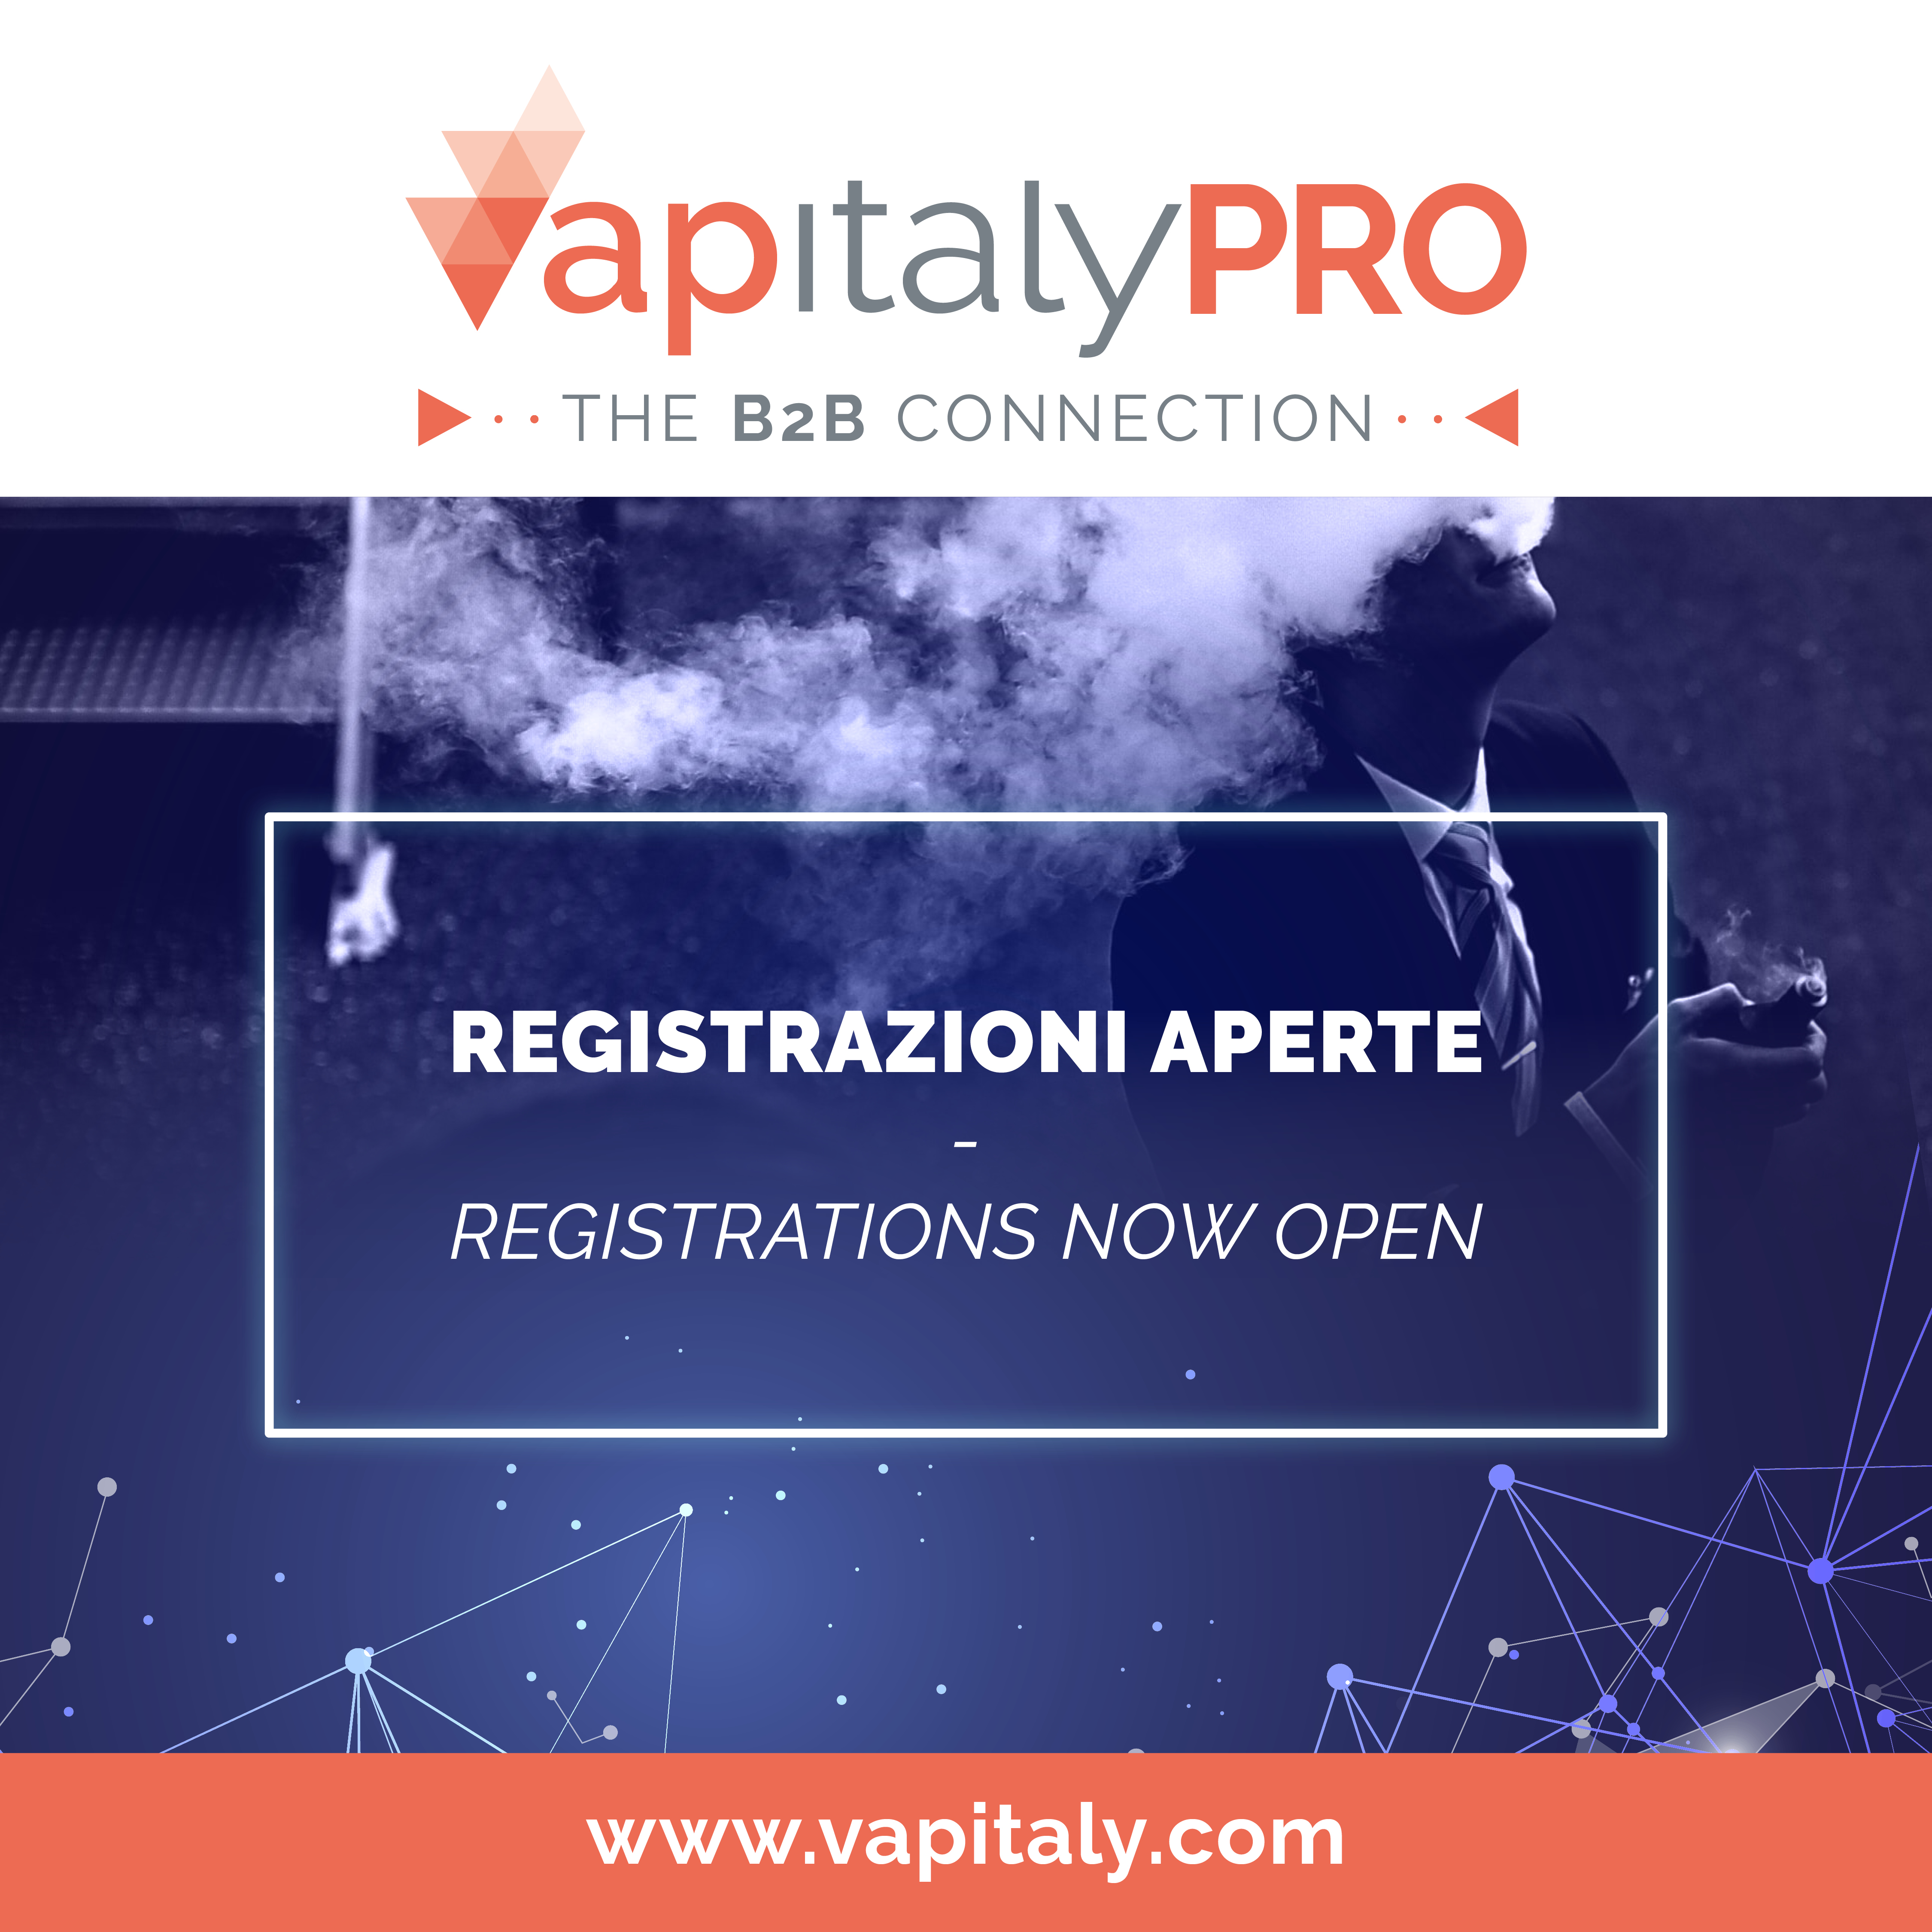 Registrations are now open for VapitalyPRO, the only exclusively B2B vaping event in Europe